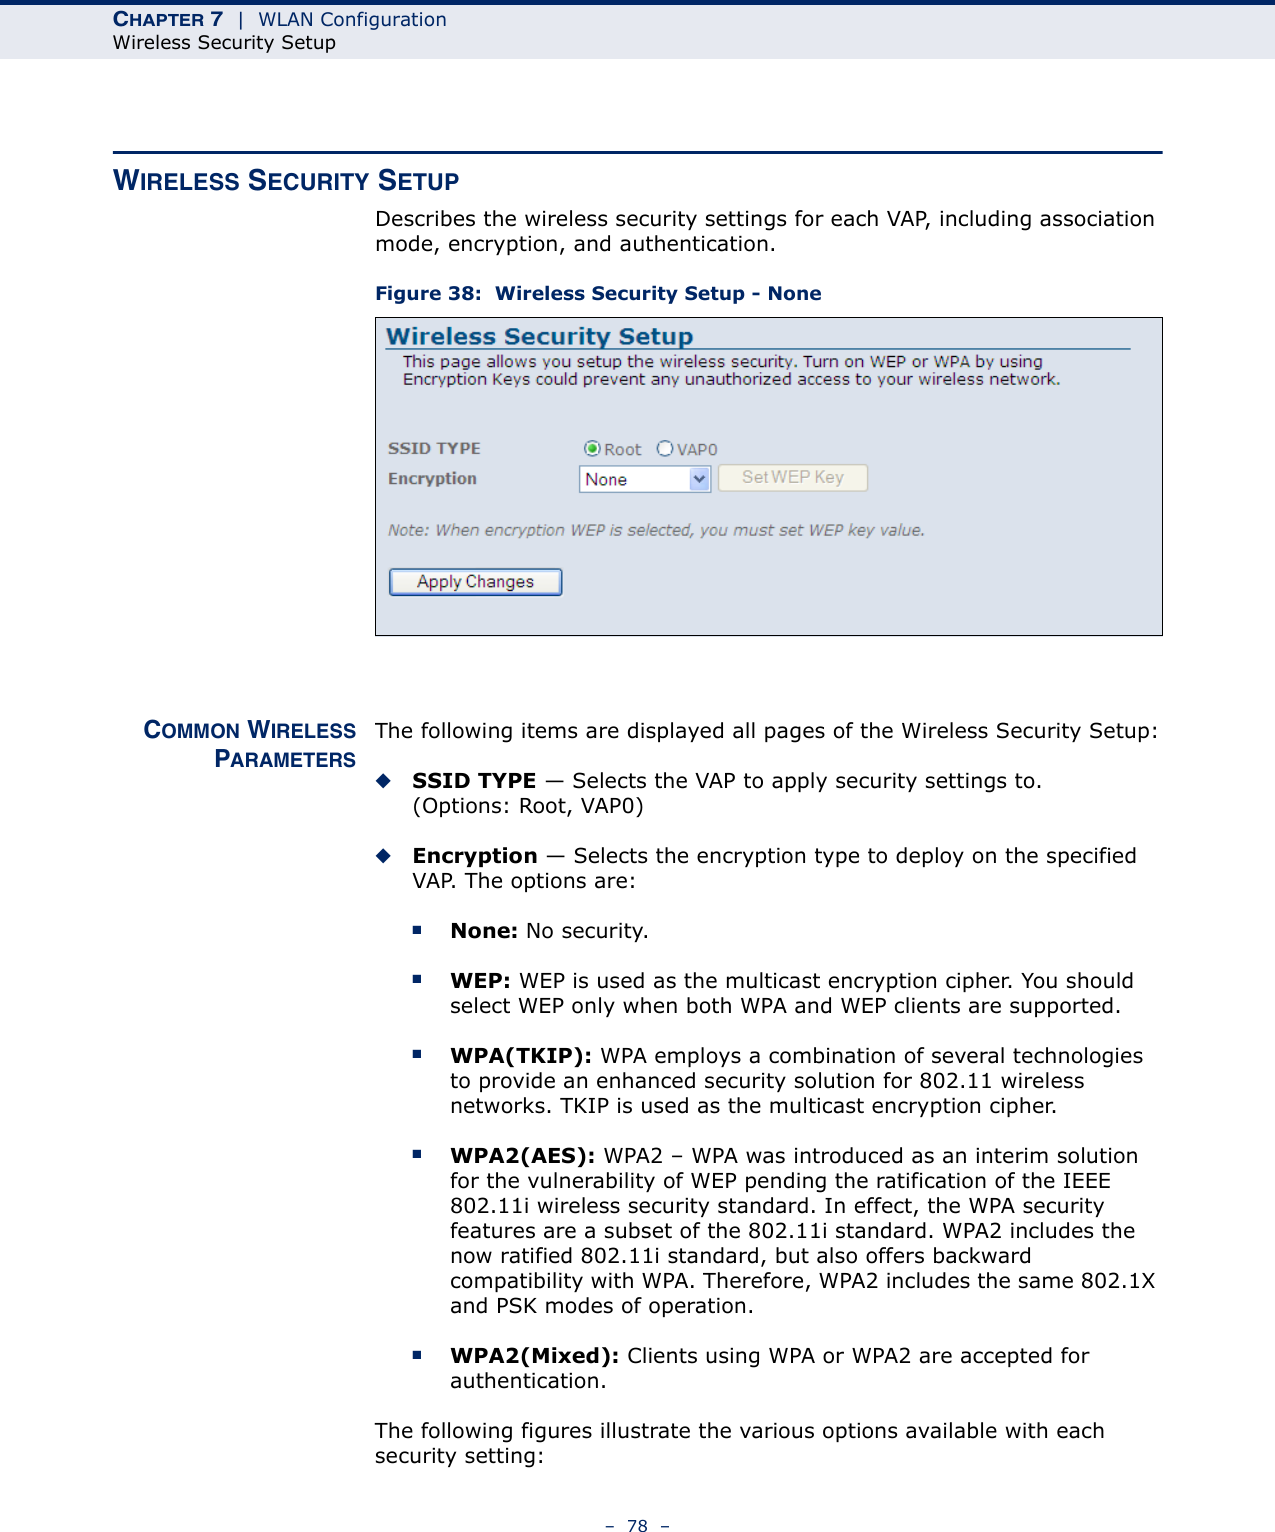 CHAPTER 7  |  WLAN ConfigurationWireless Security Setup–  78  –WIRELESS SECURITY SETUPDescribes the wireless security settings for each VAP, including association mode, encryption, and authentication.Figure 38:  Wireless Security Setup - NoneCOMMON WIRELESSPARAMETERSThe following items are displayed all pages of the Wireless Security Setup:◆SSID TYPE — Selects the VAP to apply security settings to. (Options: Root, VAP0)◆Encryption — Selects the encryption type to deploy on the specified VAP. The options are:■None: No security.■WEP: WEP is used as the multicast encryption cipher. You should select WEP only when both WPA and WEP clients are supported.■WPA(TKIP): WPA employs a combination of several technologies to provide an enhanced security solution for 802.11 wireless networks. TKIP is used as the multicast encryption cipher.■WPA2(AES): WPA2 – WPA was introduced as an interim solution for the vulnerability of WEP pending the ratification of the IEEE 802.11i wireless security standard. In effect, the WPA security features are a subset of the 802.11i standard. WPA2 includes the now ratified 802.11i standard, but also offers backward compatibility with WPA. Therefore, WPA2 includes the same 802.1X and PSK modes of operation.■WPA2(Mixed): Clients using WPA or WPA2 are accepted for authentication.The following figures illustrate the various options available with each security setting: